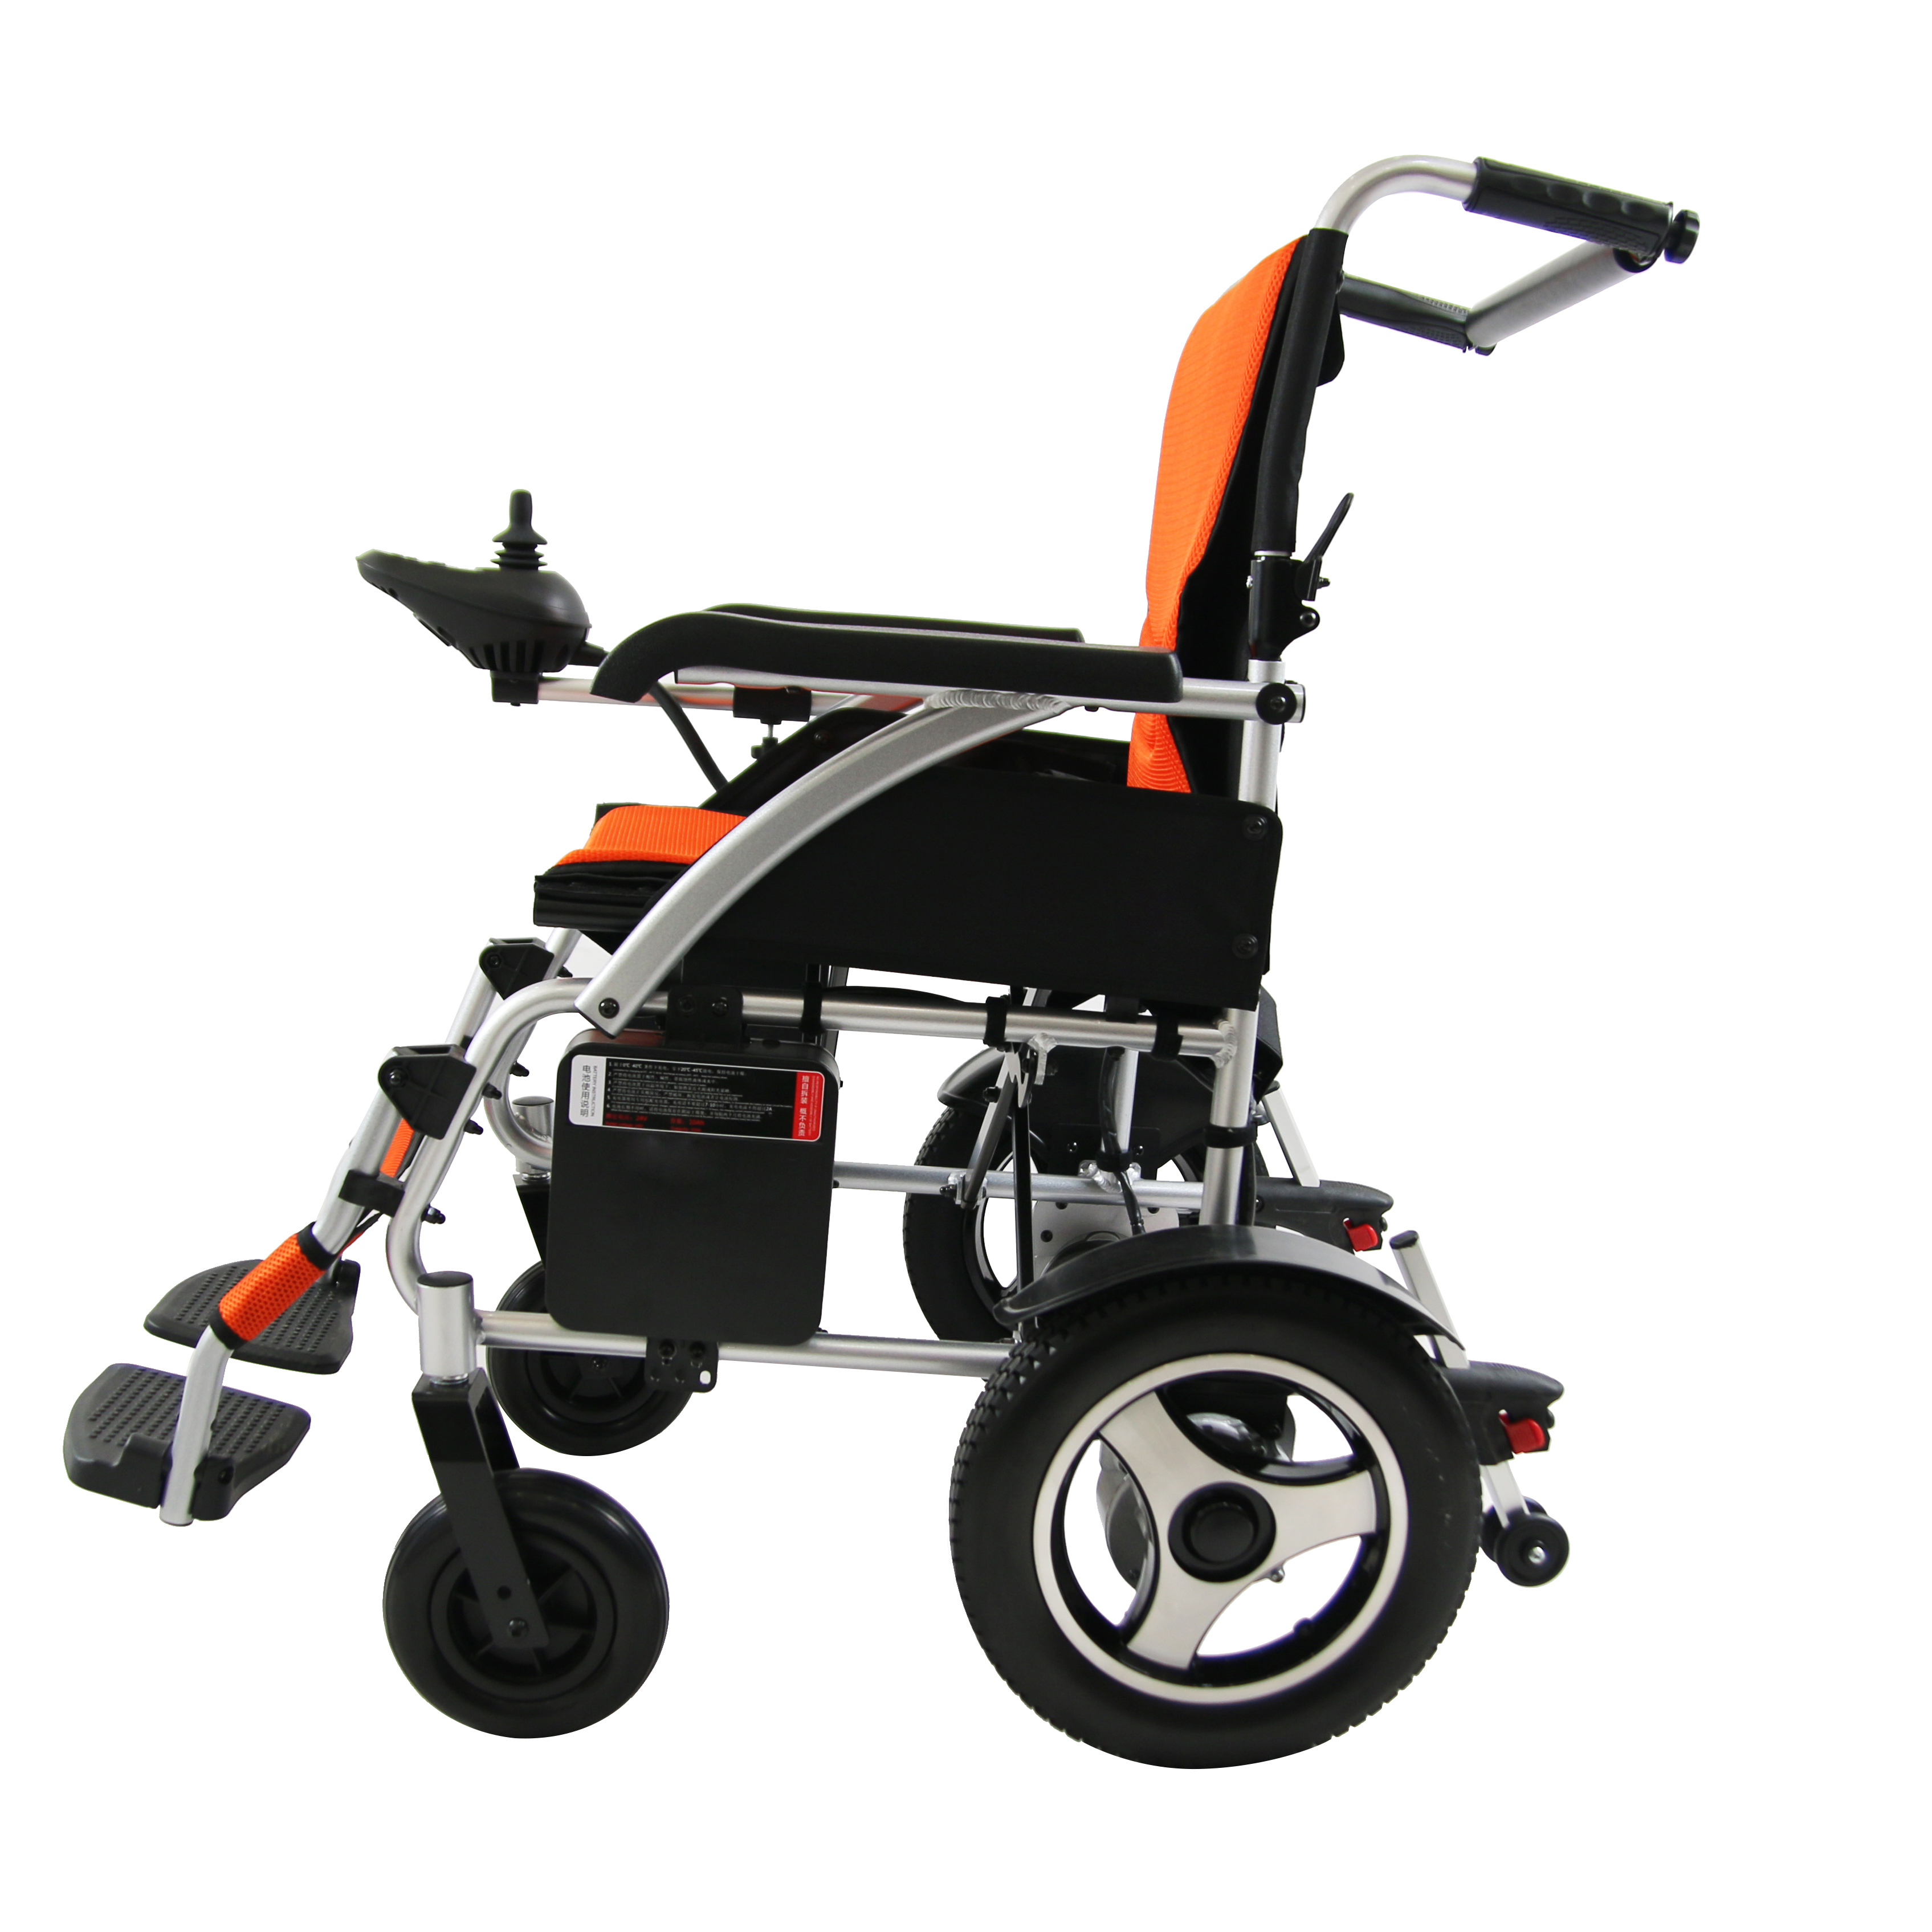 factory customizable wheelchair price list training foldable power wheelchair for disabled